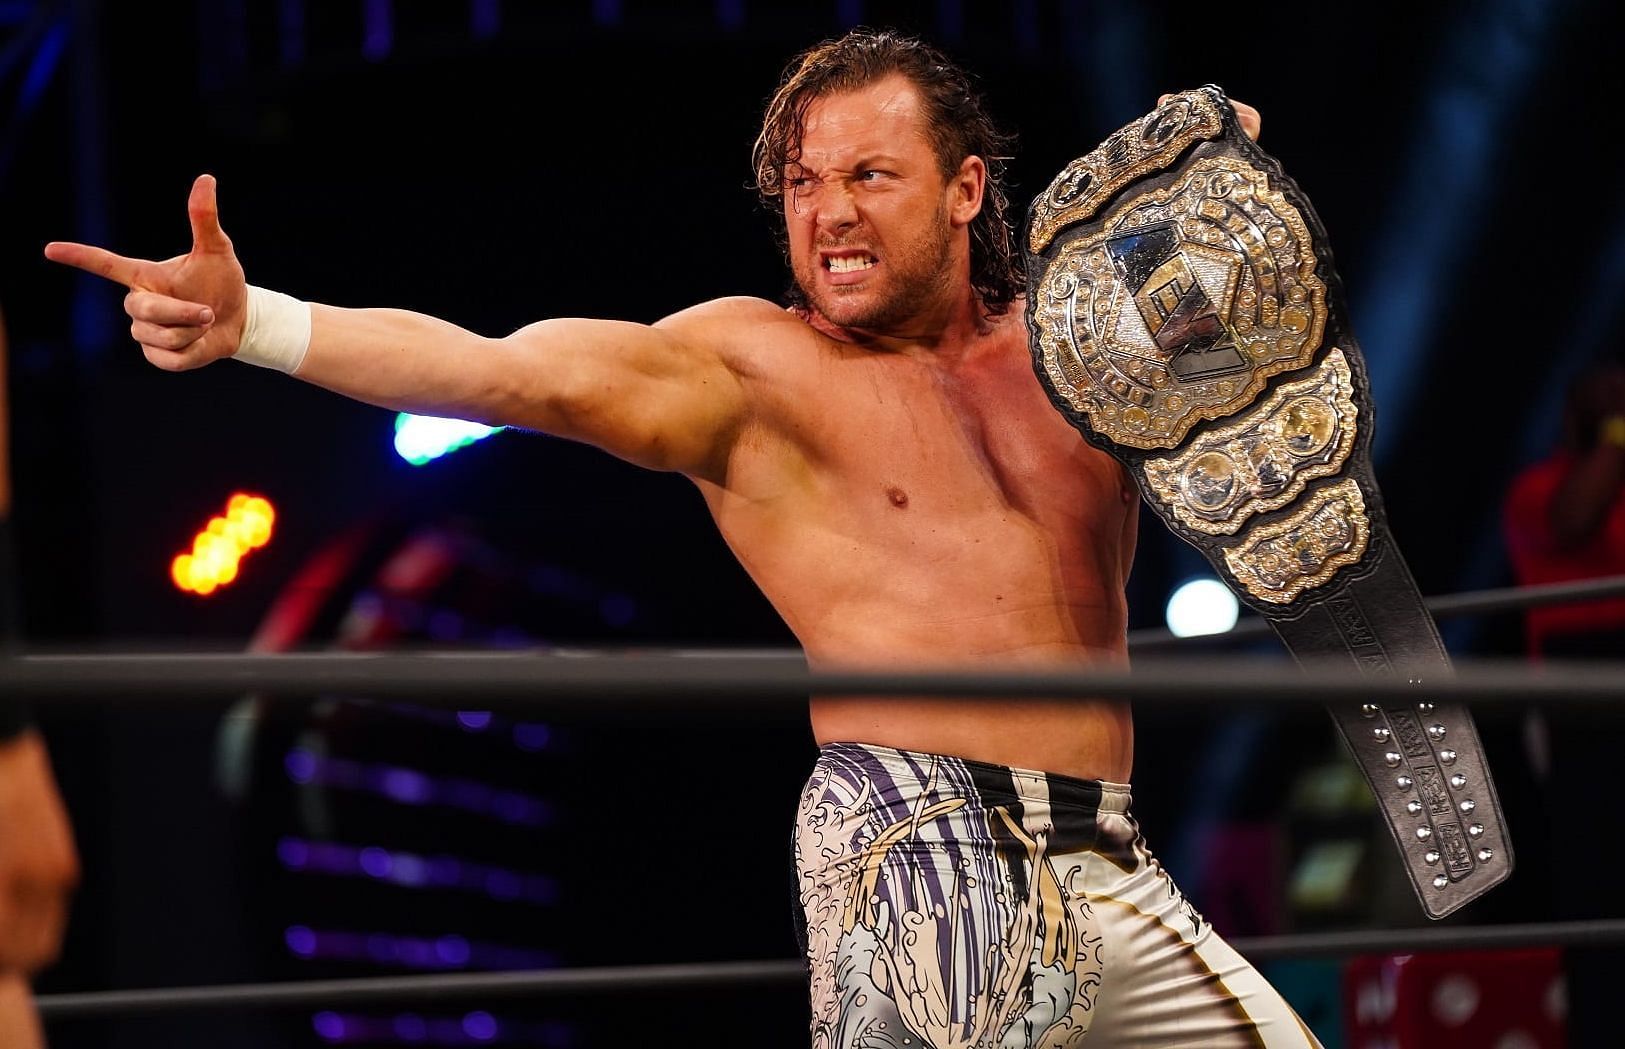 Kenny Omega was the longest reigning AEW World Champion